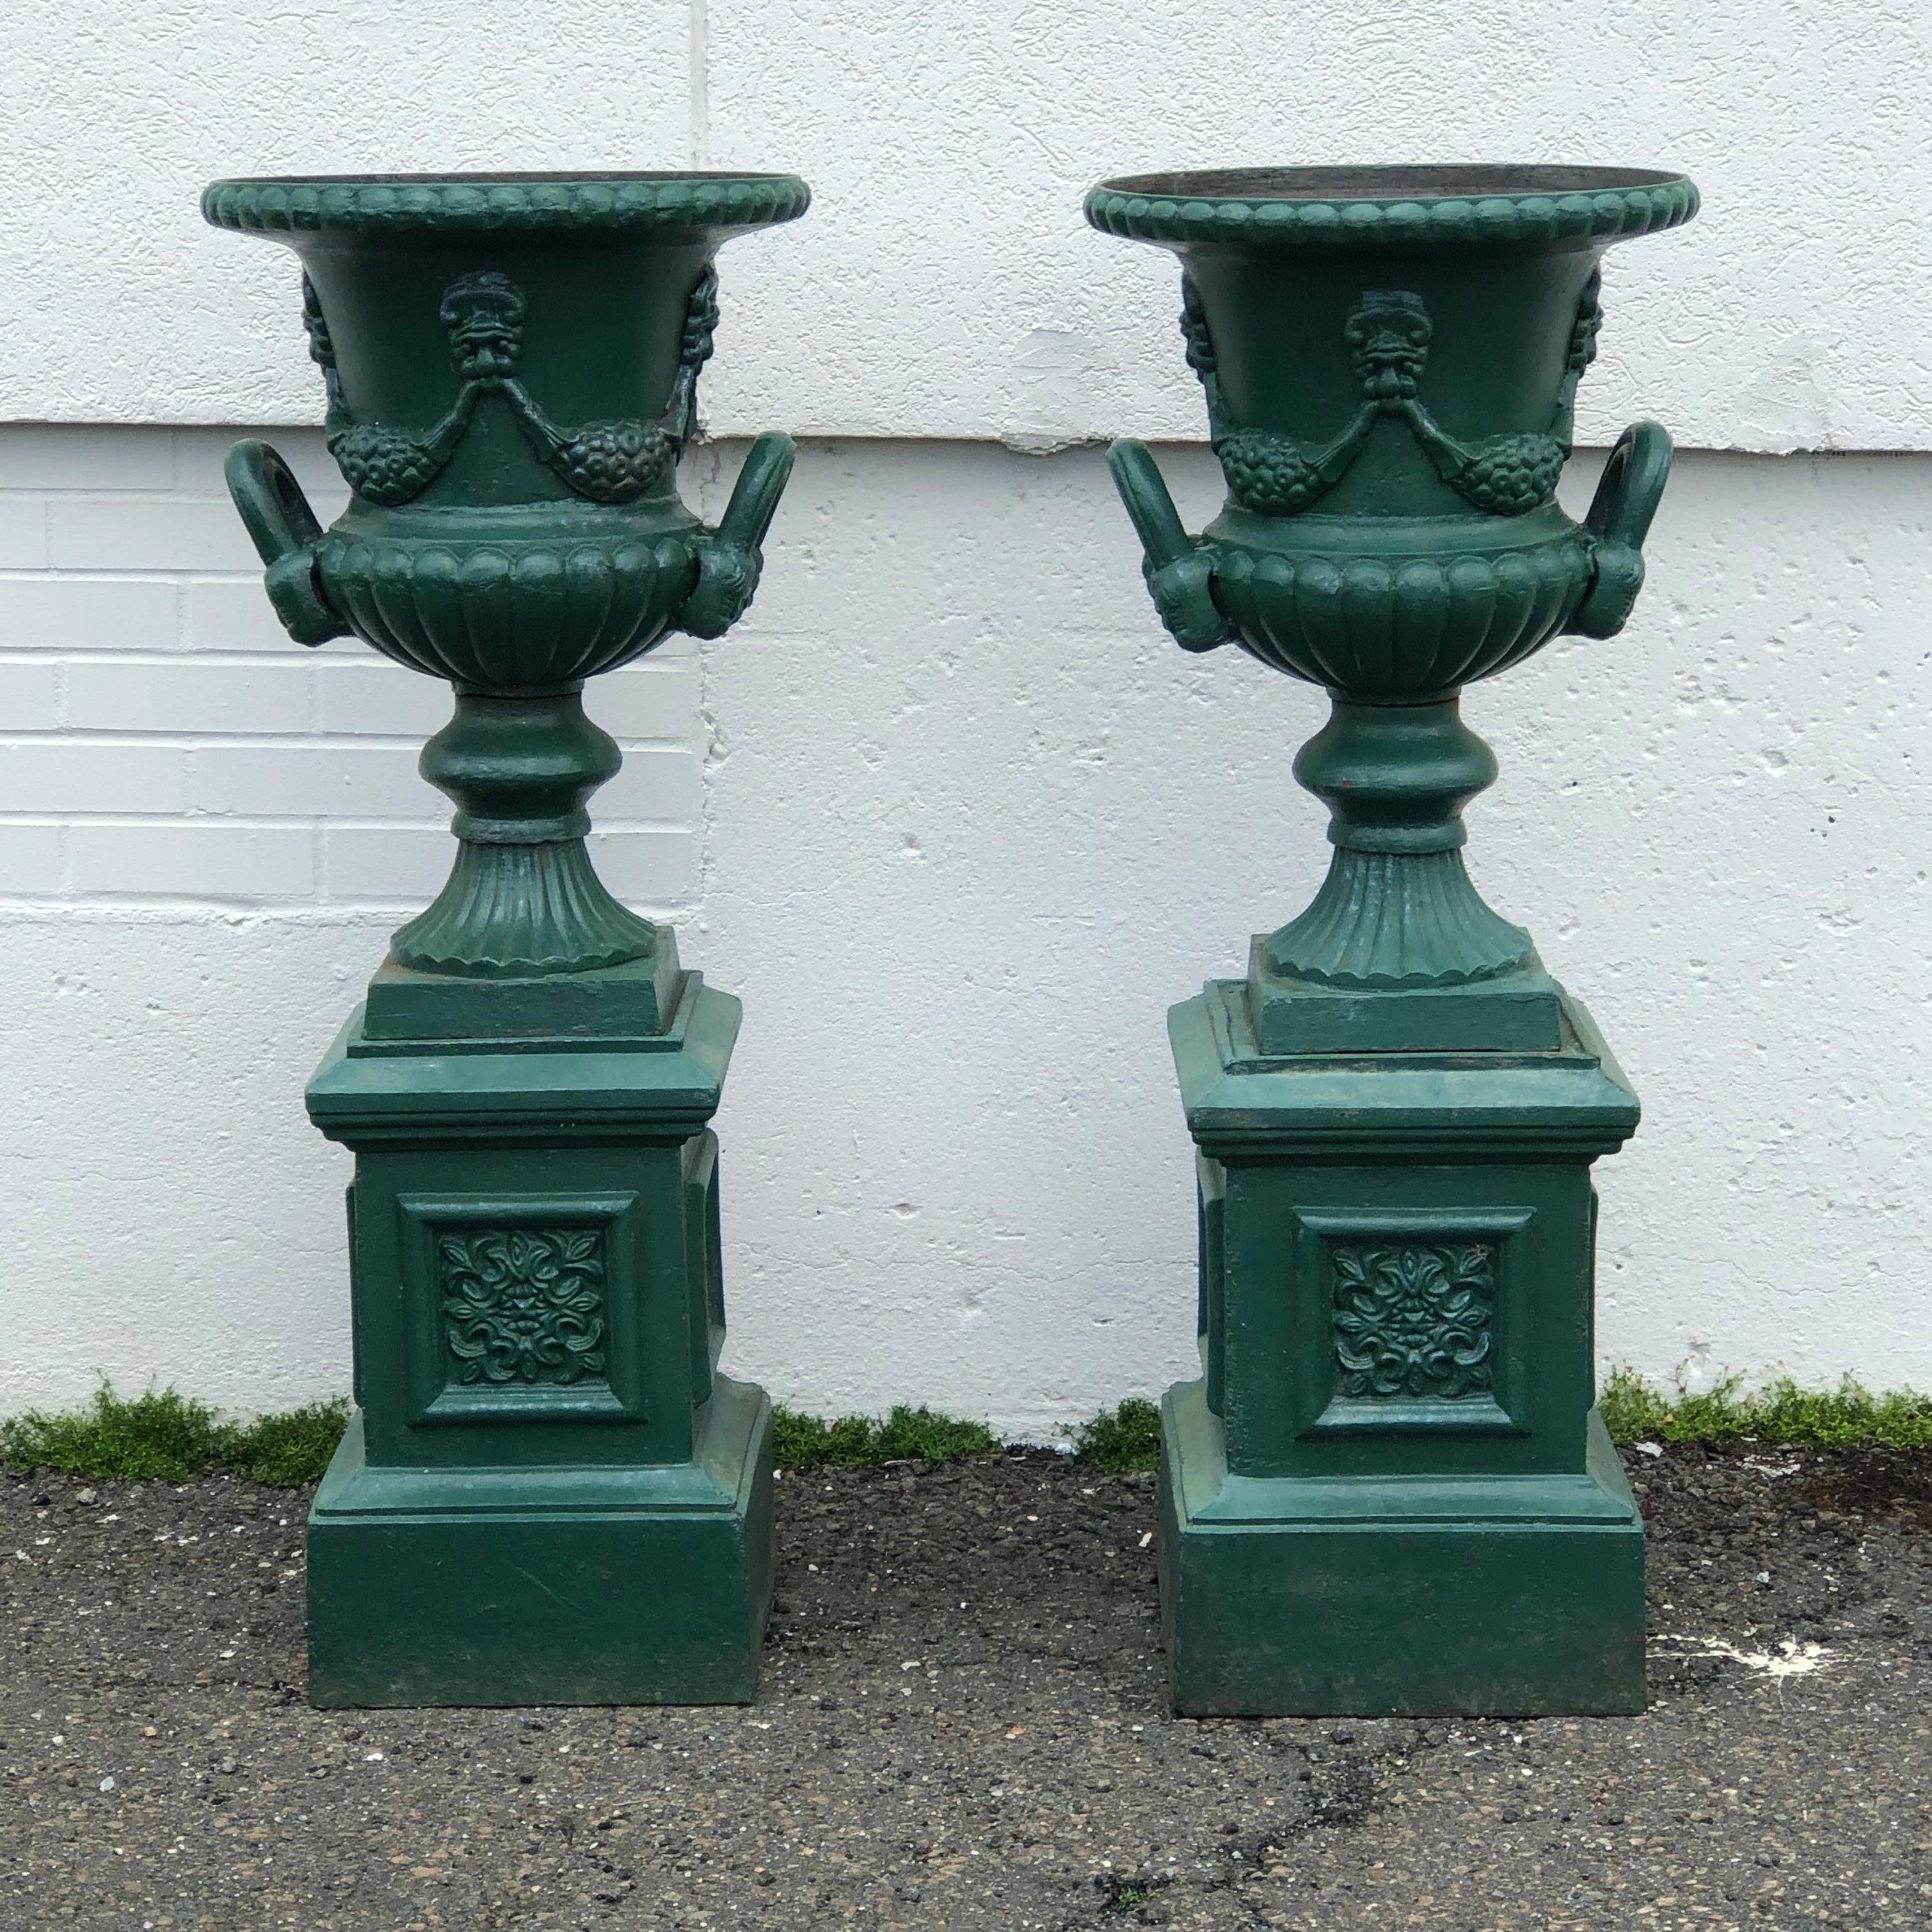 Pair of fine Antique Cast iron Garden Urns, all original including plinths, of Medici shape with handles and décor of garlands and masks.